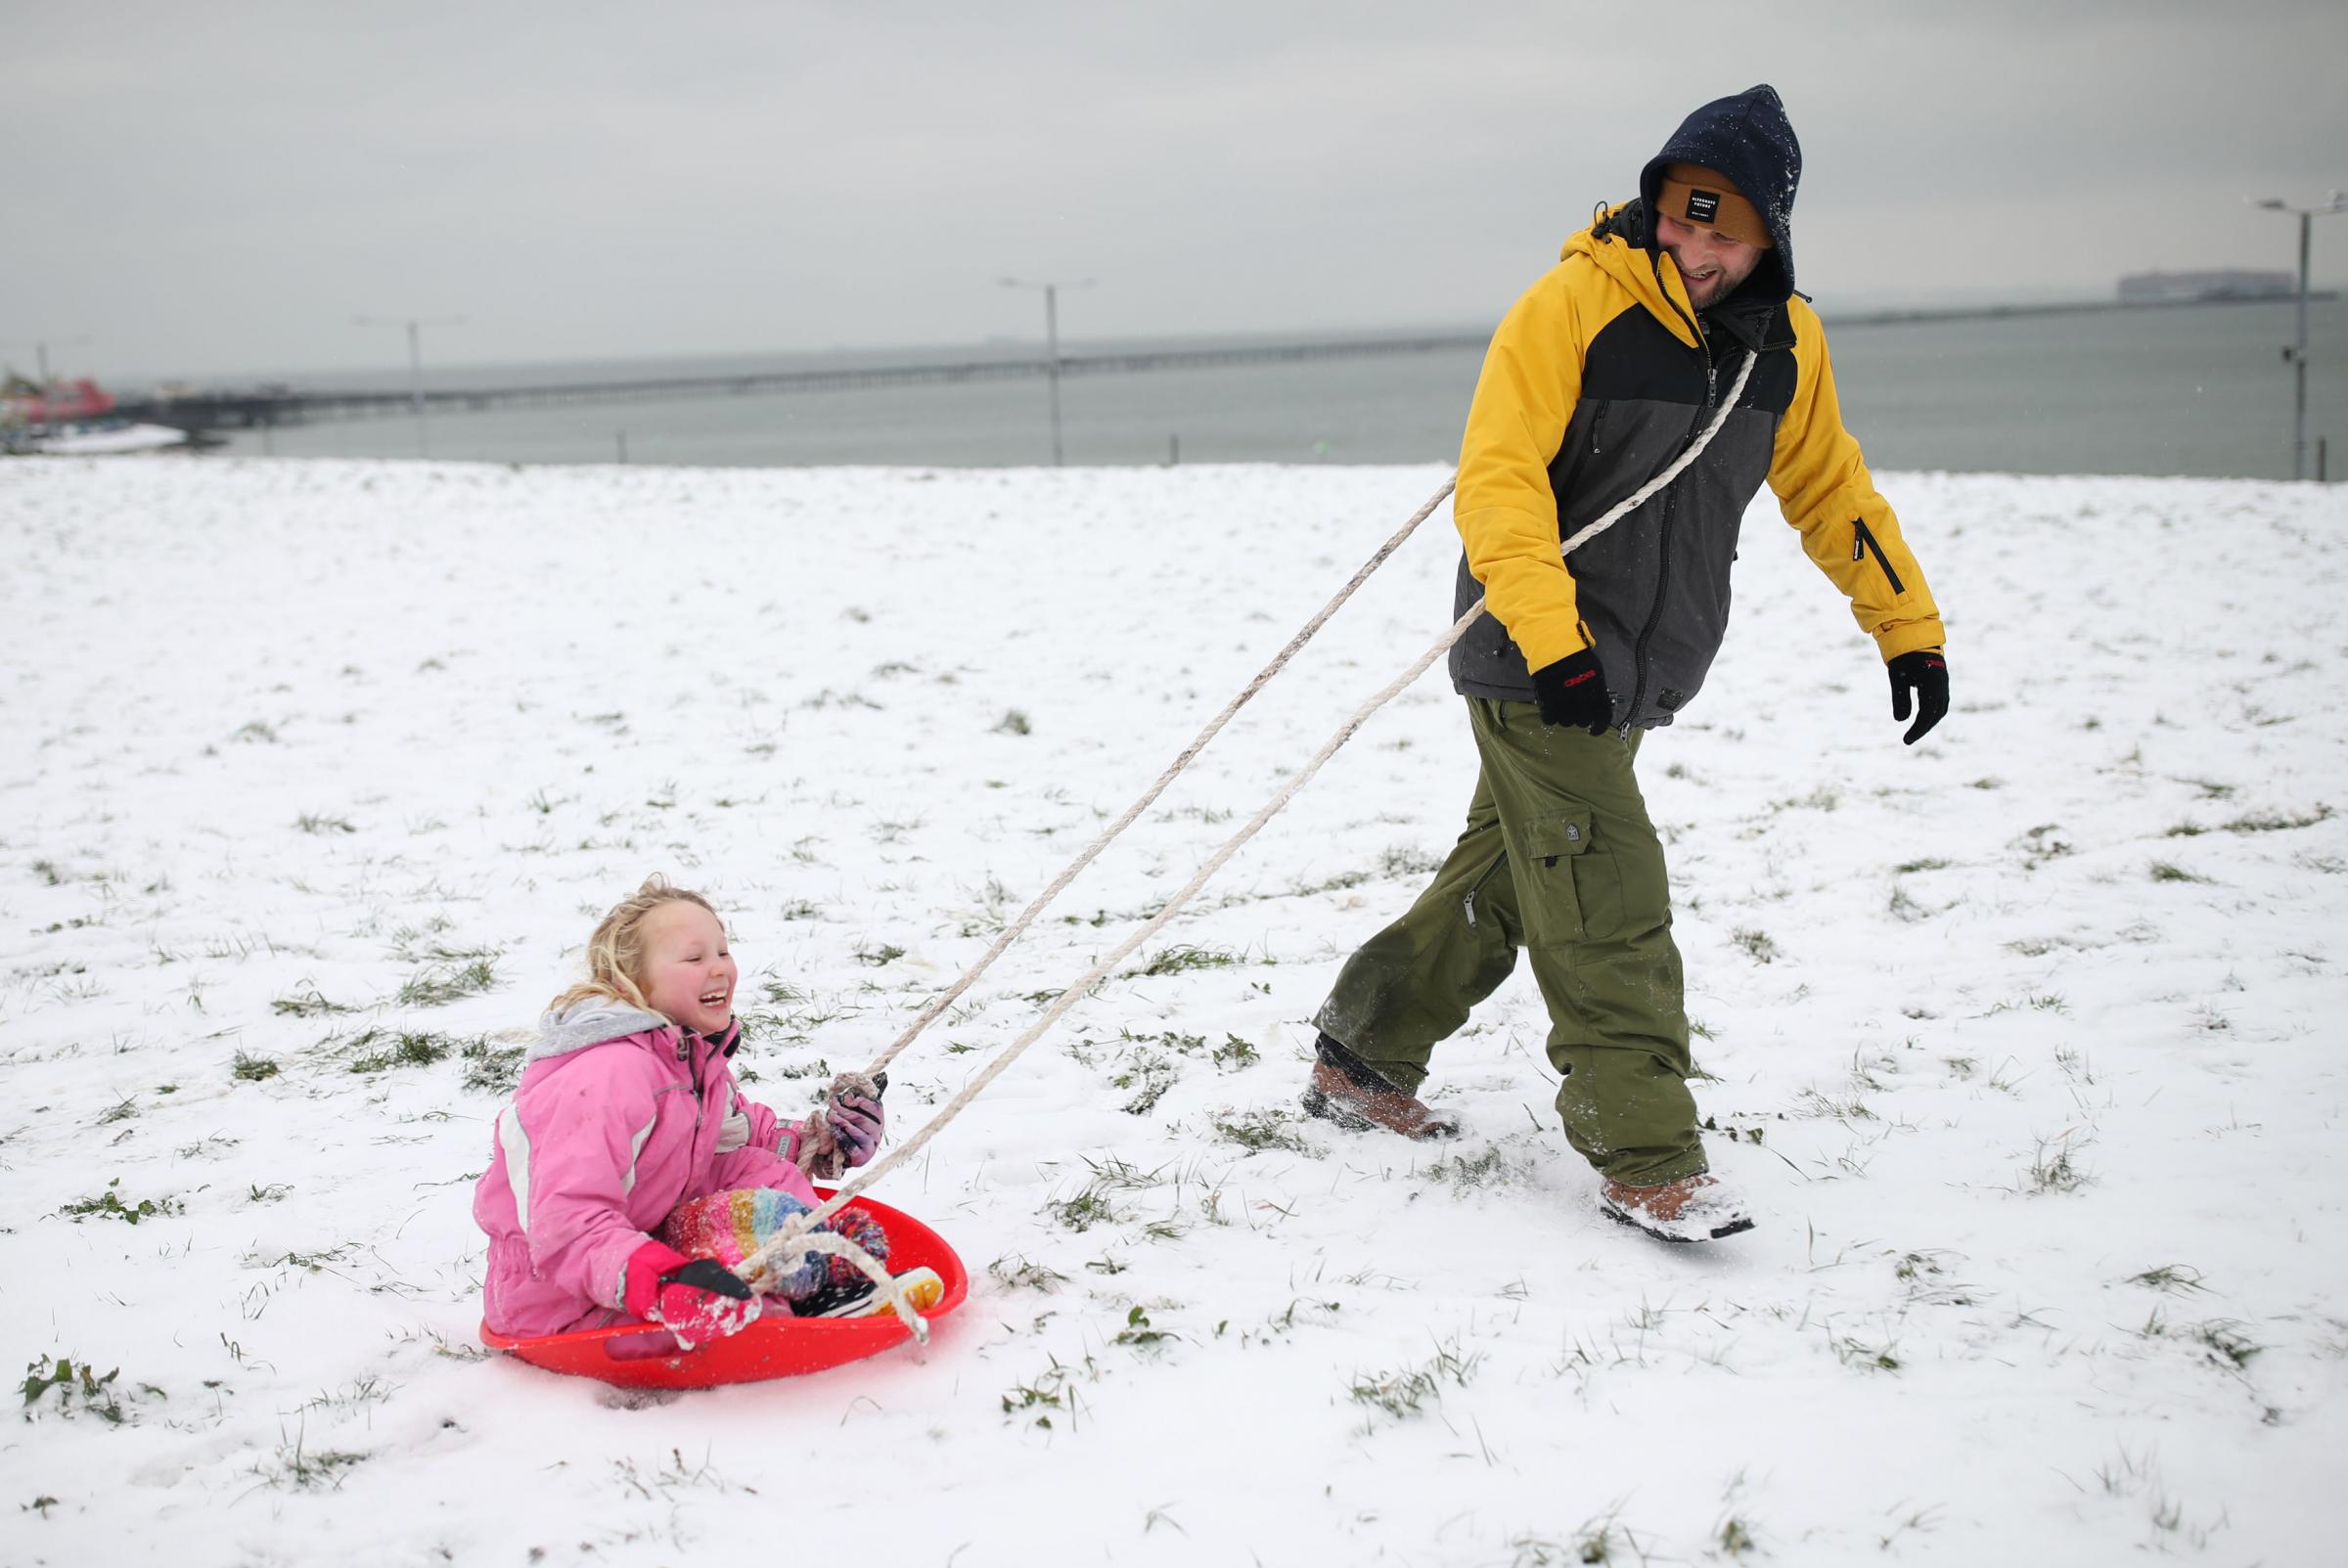 Daniel Smith with his daughter Betty, aged 7, playing on the snow-covered seafront at Southend. Picture: Yui Mok/PA Wire